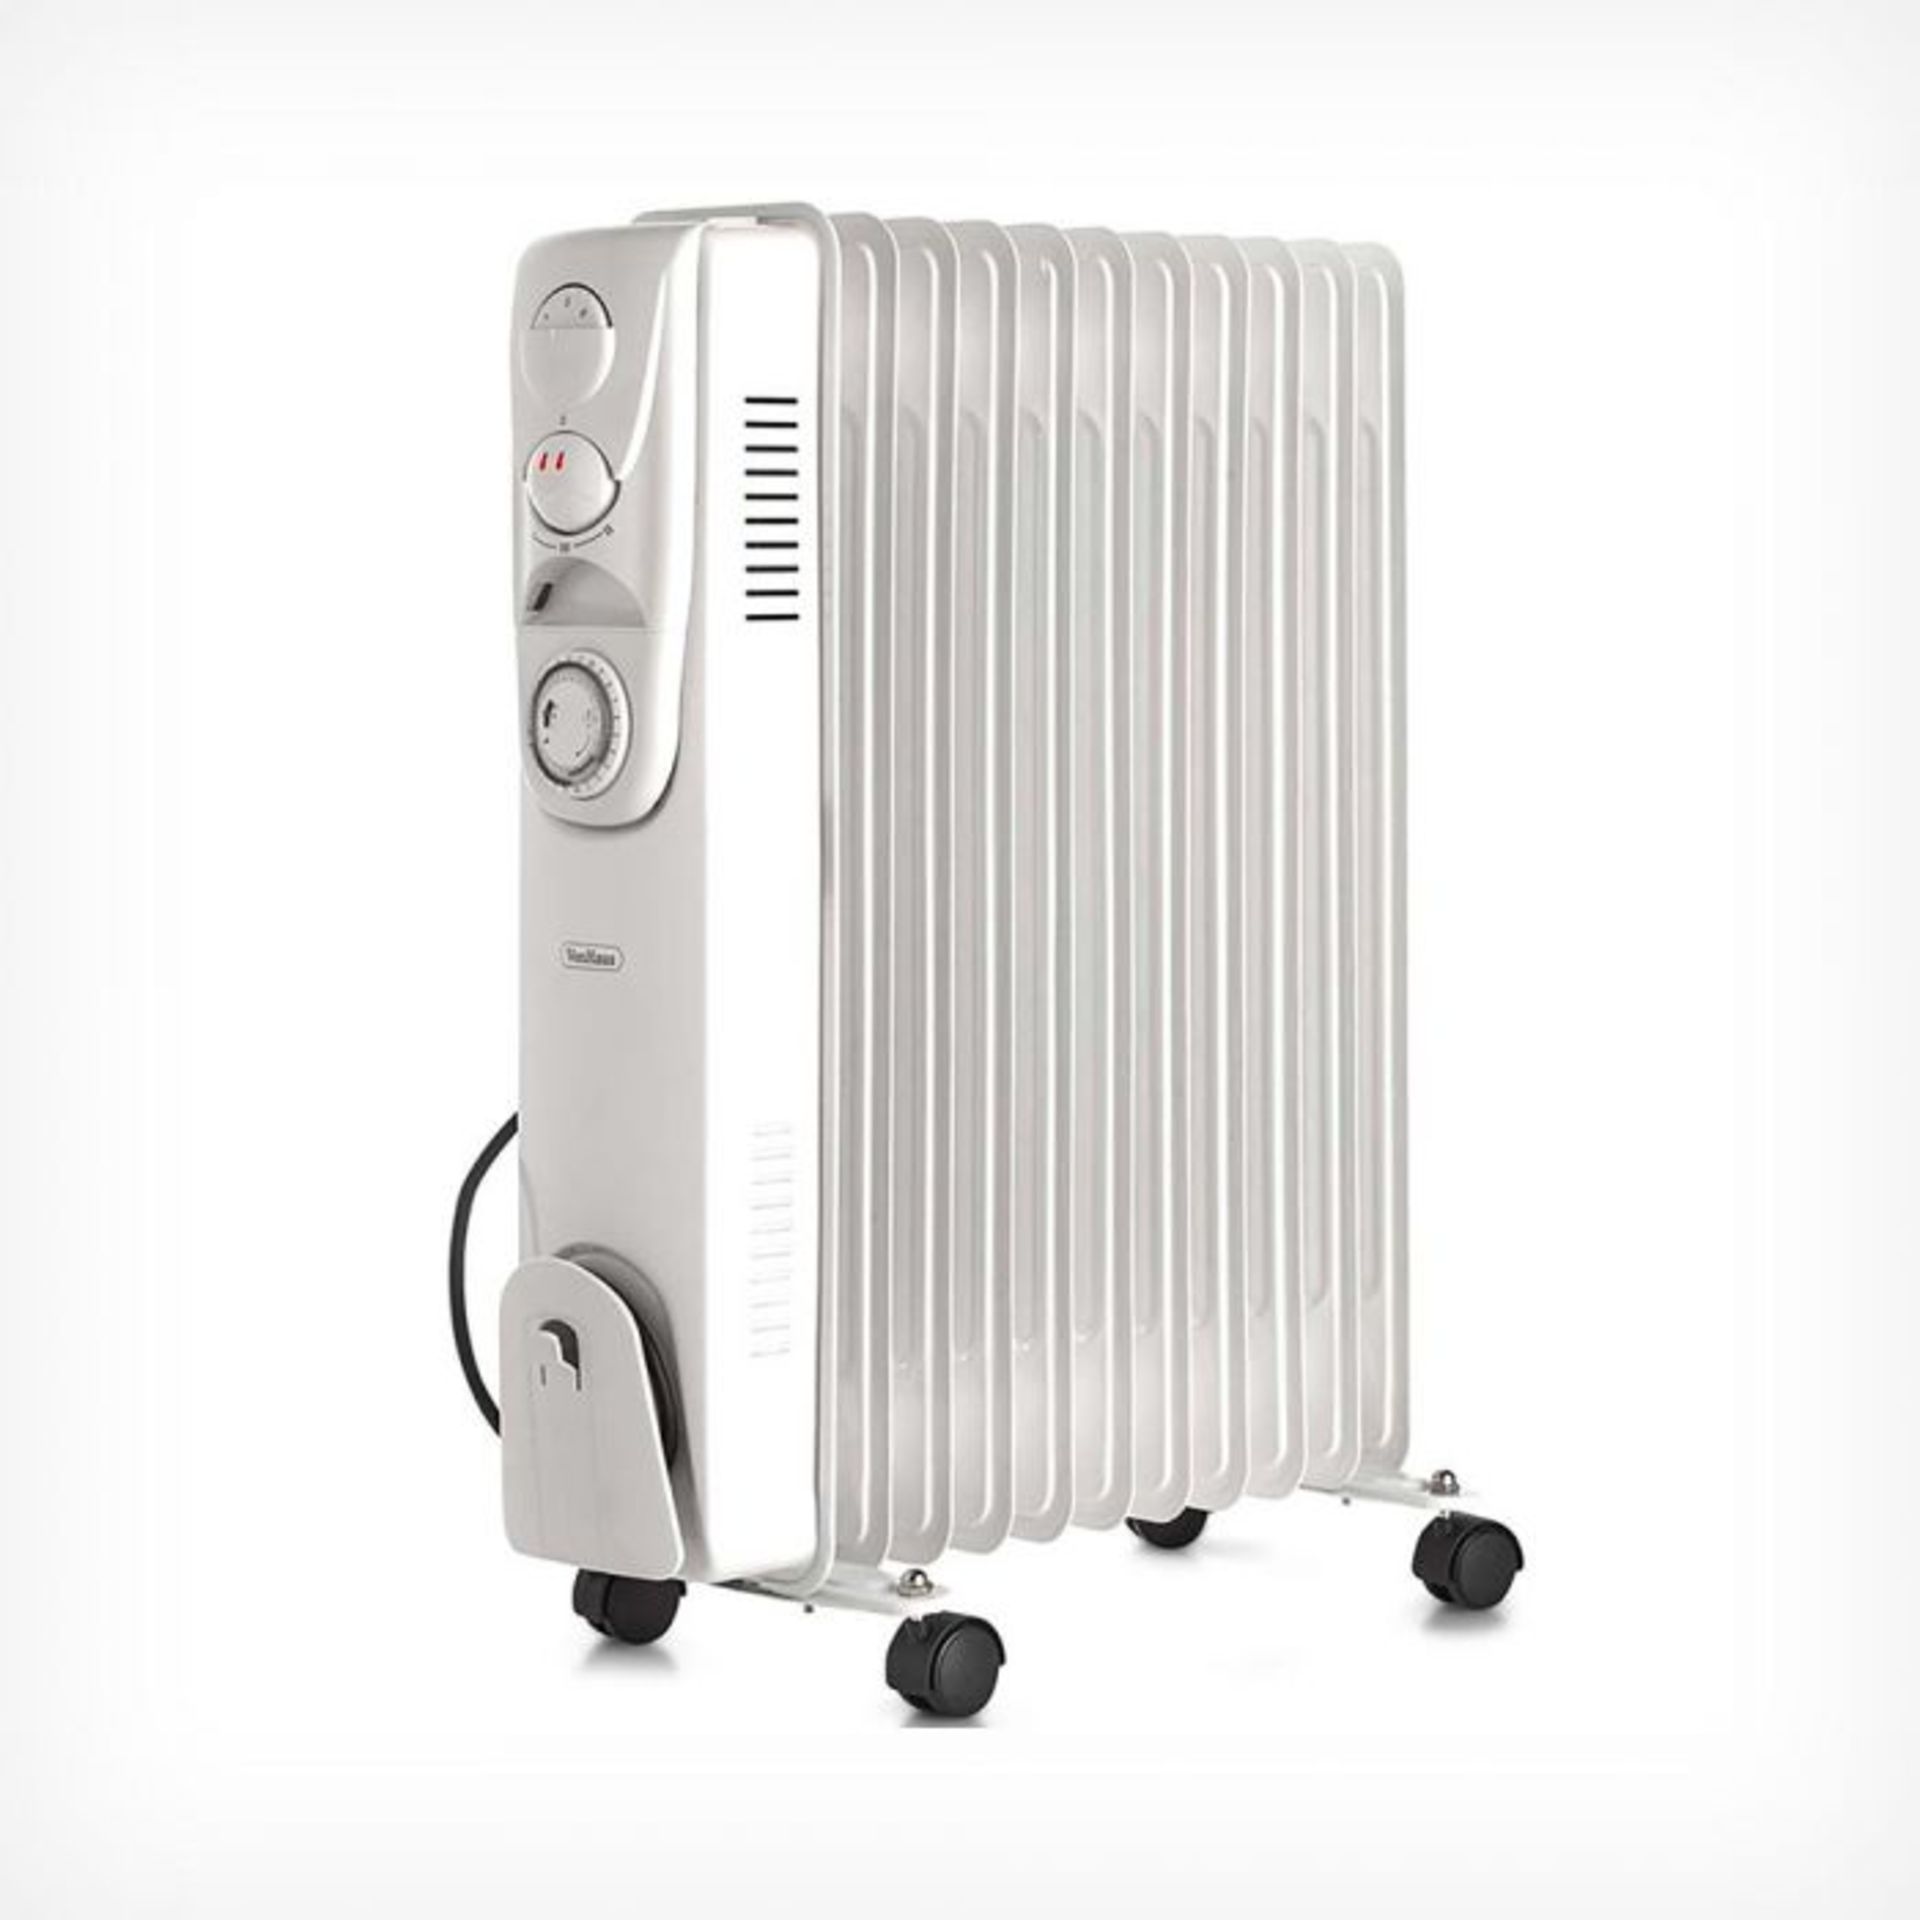 (V340) 11 Fin 2500W Oil Filled Radiator - White Suitable for areas up to 28 square metres 3 p... - Image 4 of 4